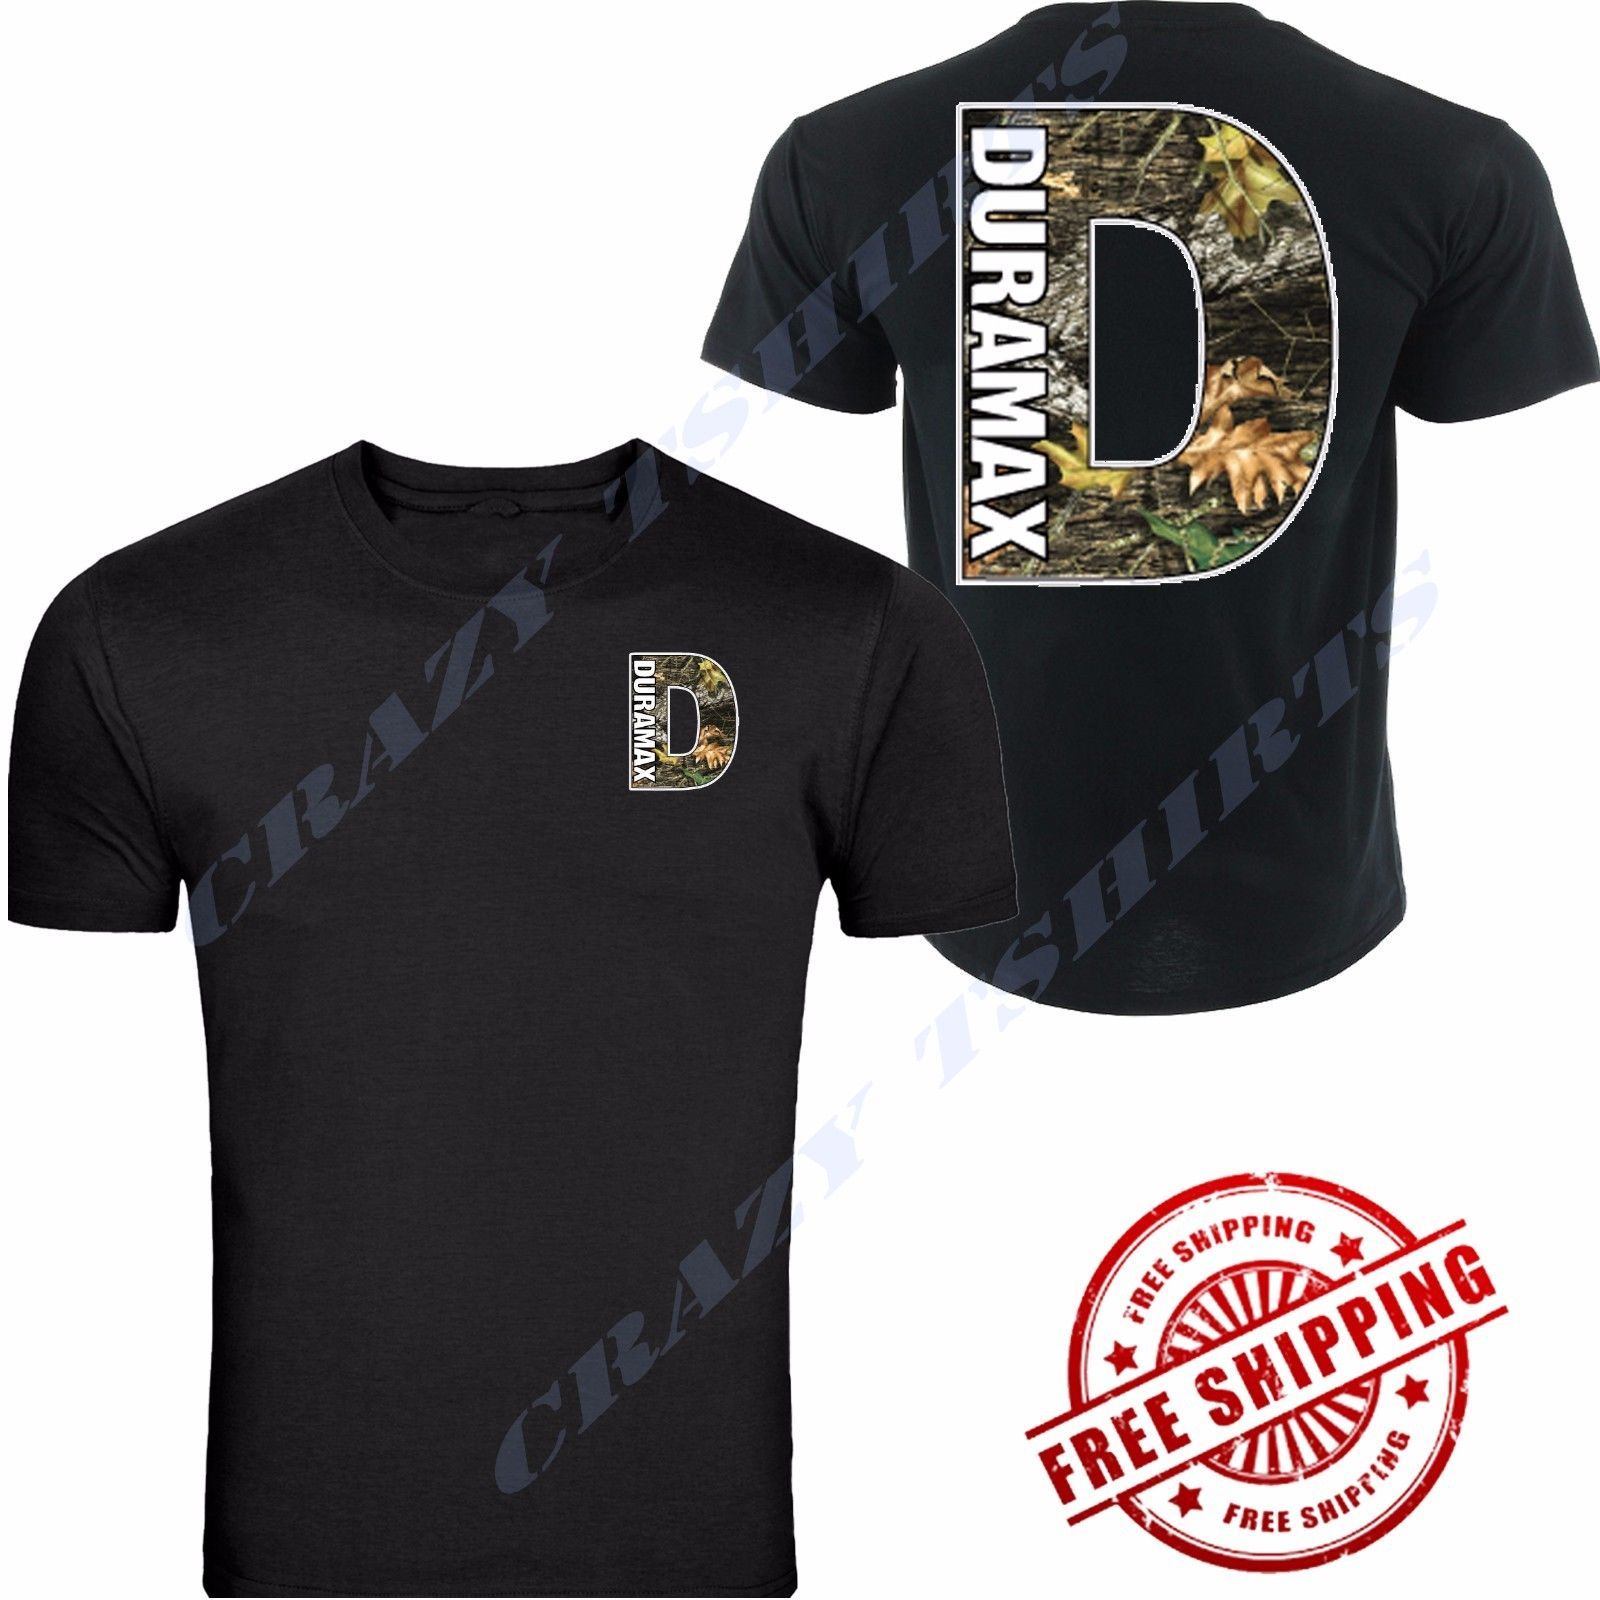 NEW CAMO DURAMAX CHEVROLET CHEVY Chest BLACK T-SHIRT TEE S-5XL FRONT & BACK